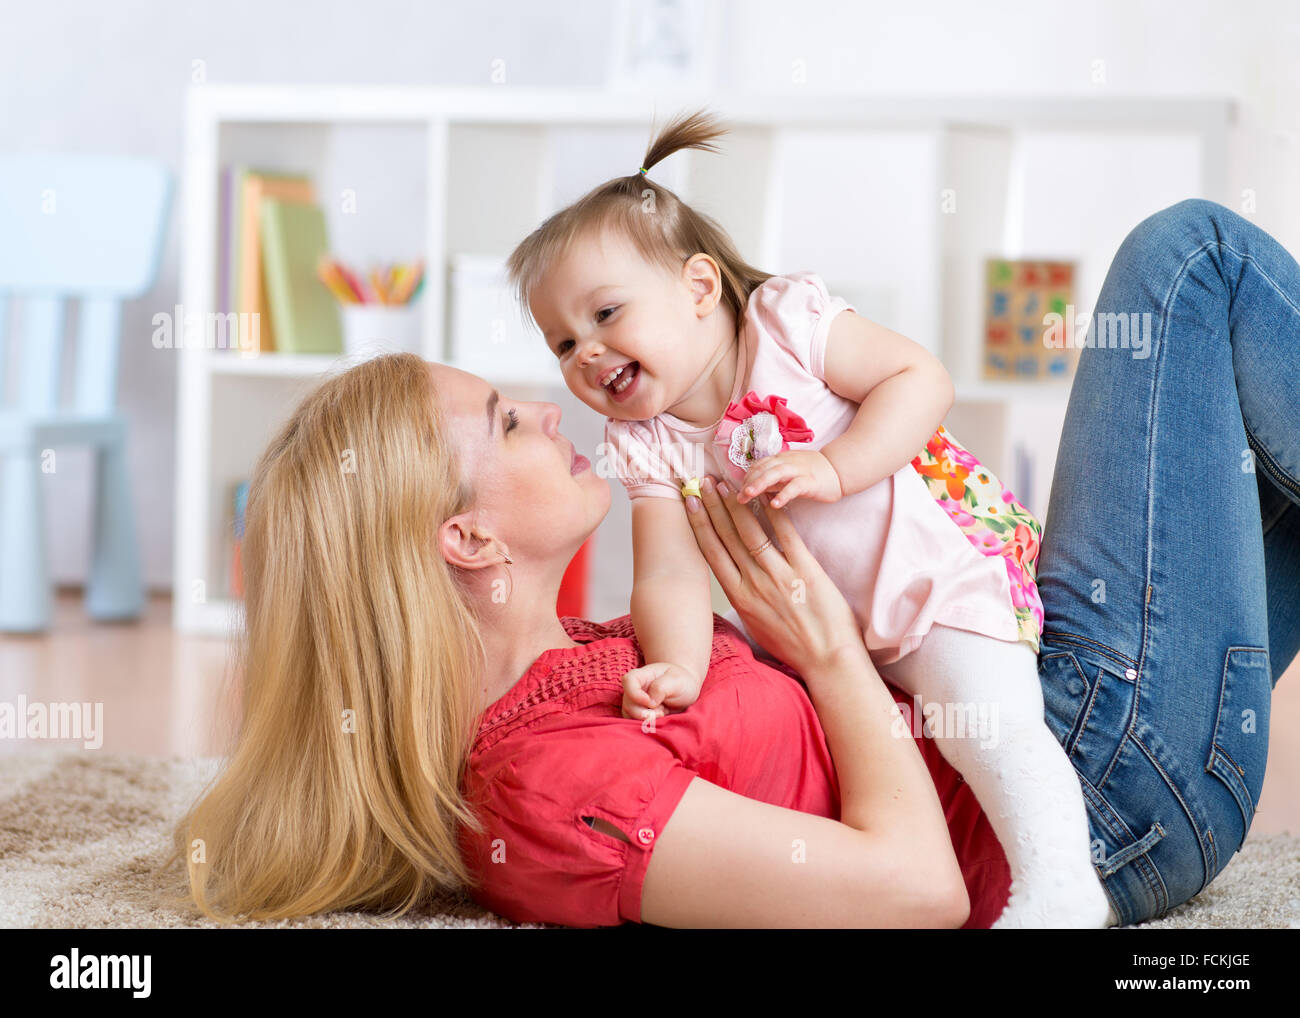 young mother with her baby having fun pastime Stock Photo